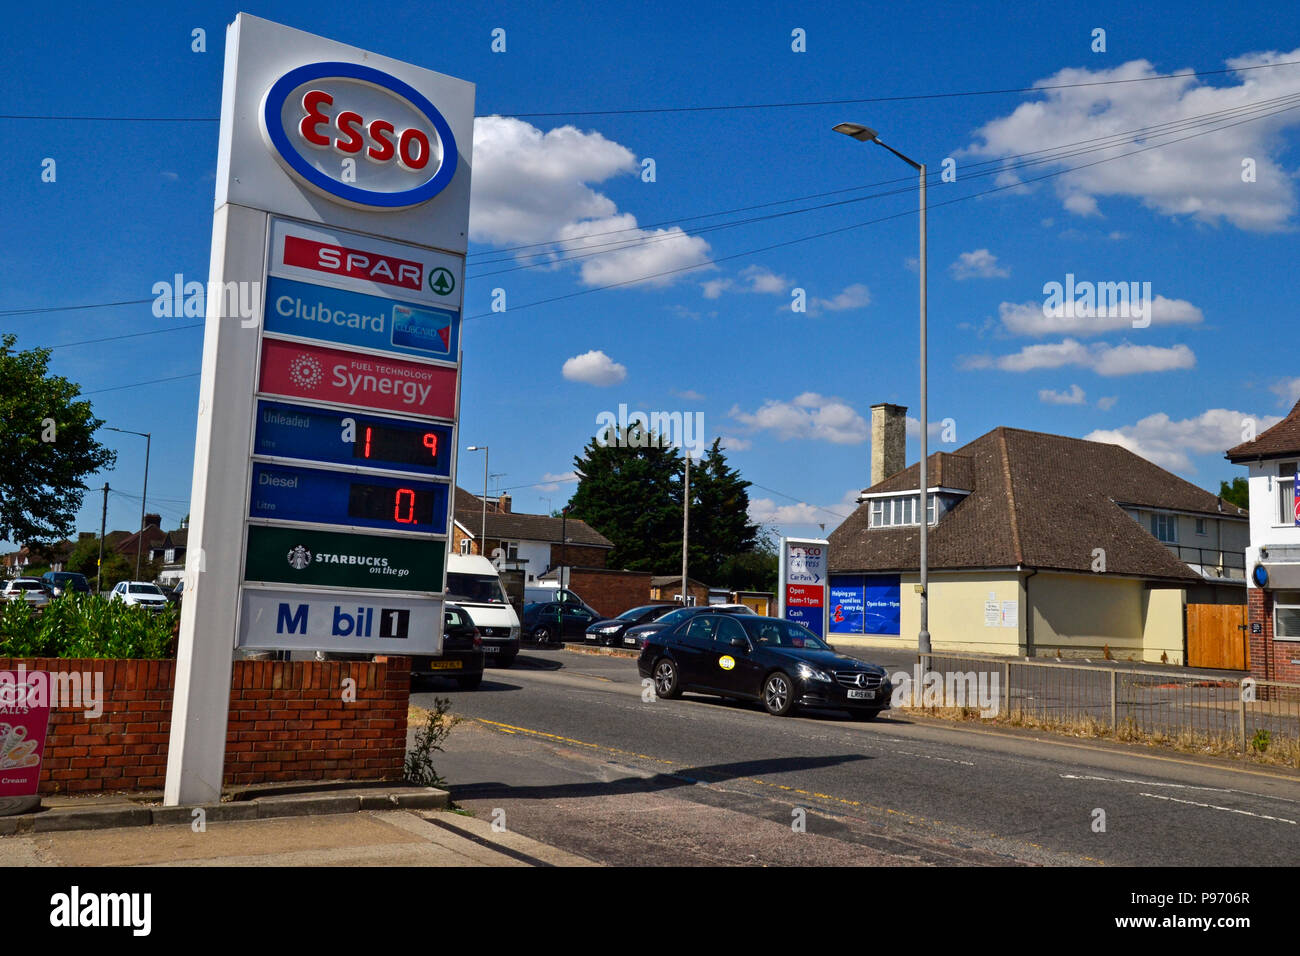 Esso Station, Booker, High Wycombe. Petrol Station. Gas Station UK, England. Britain Stock Photo